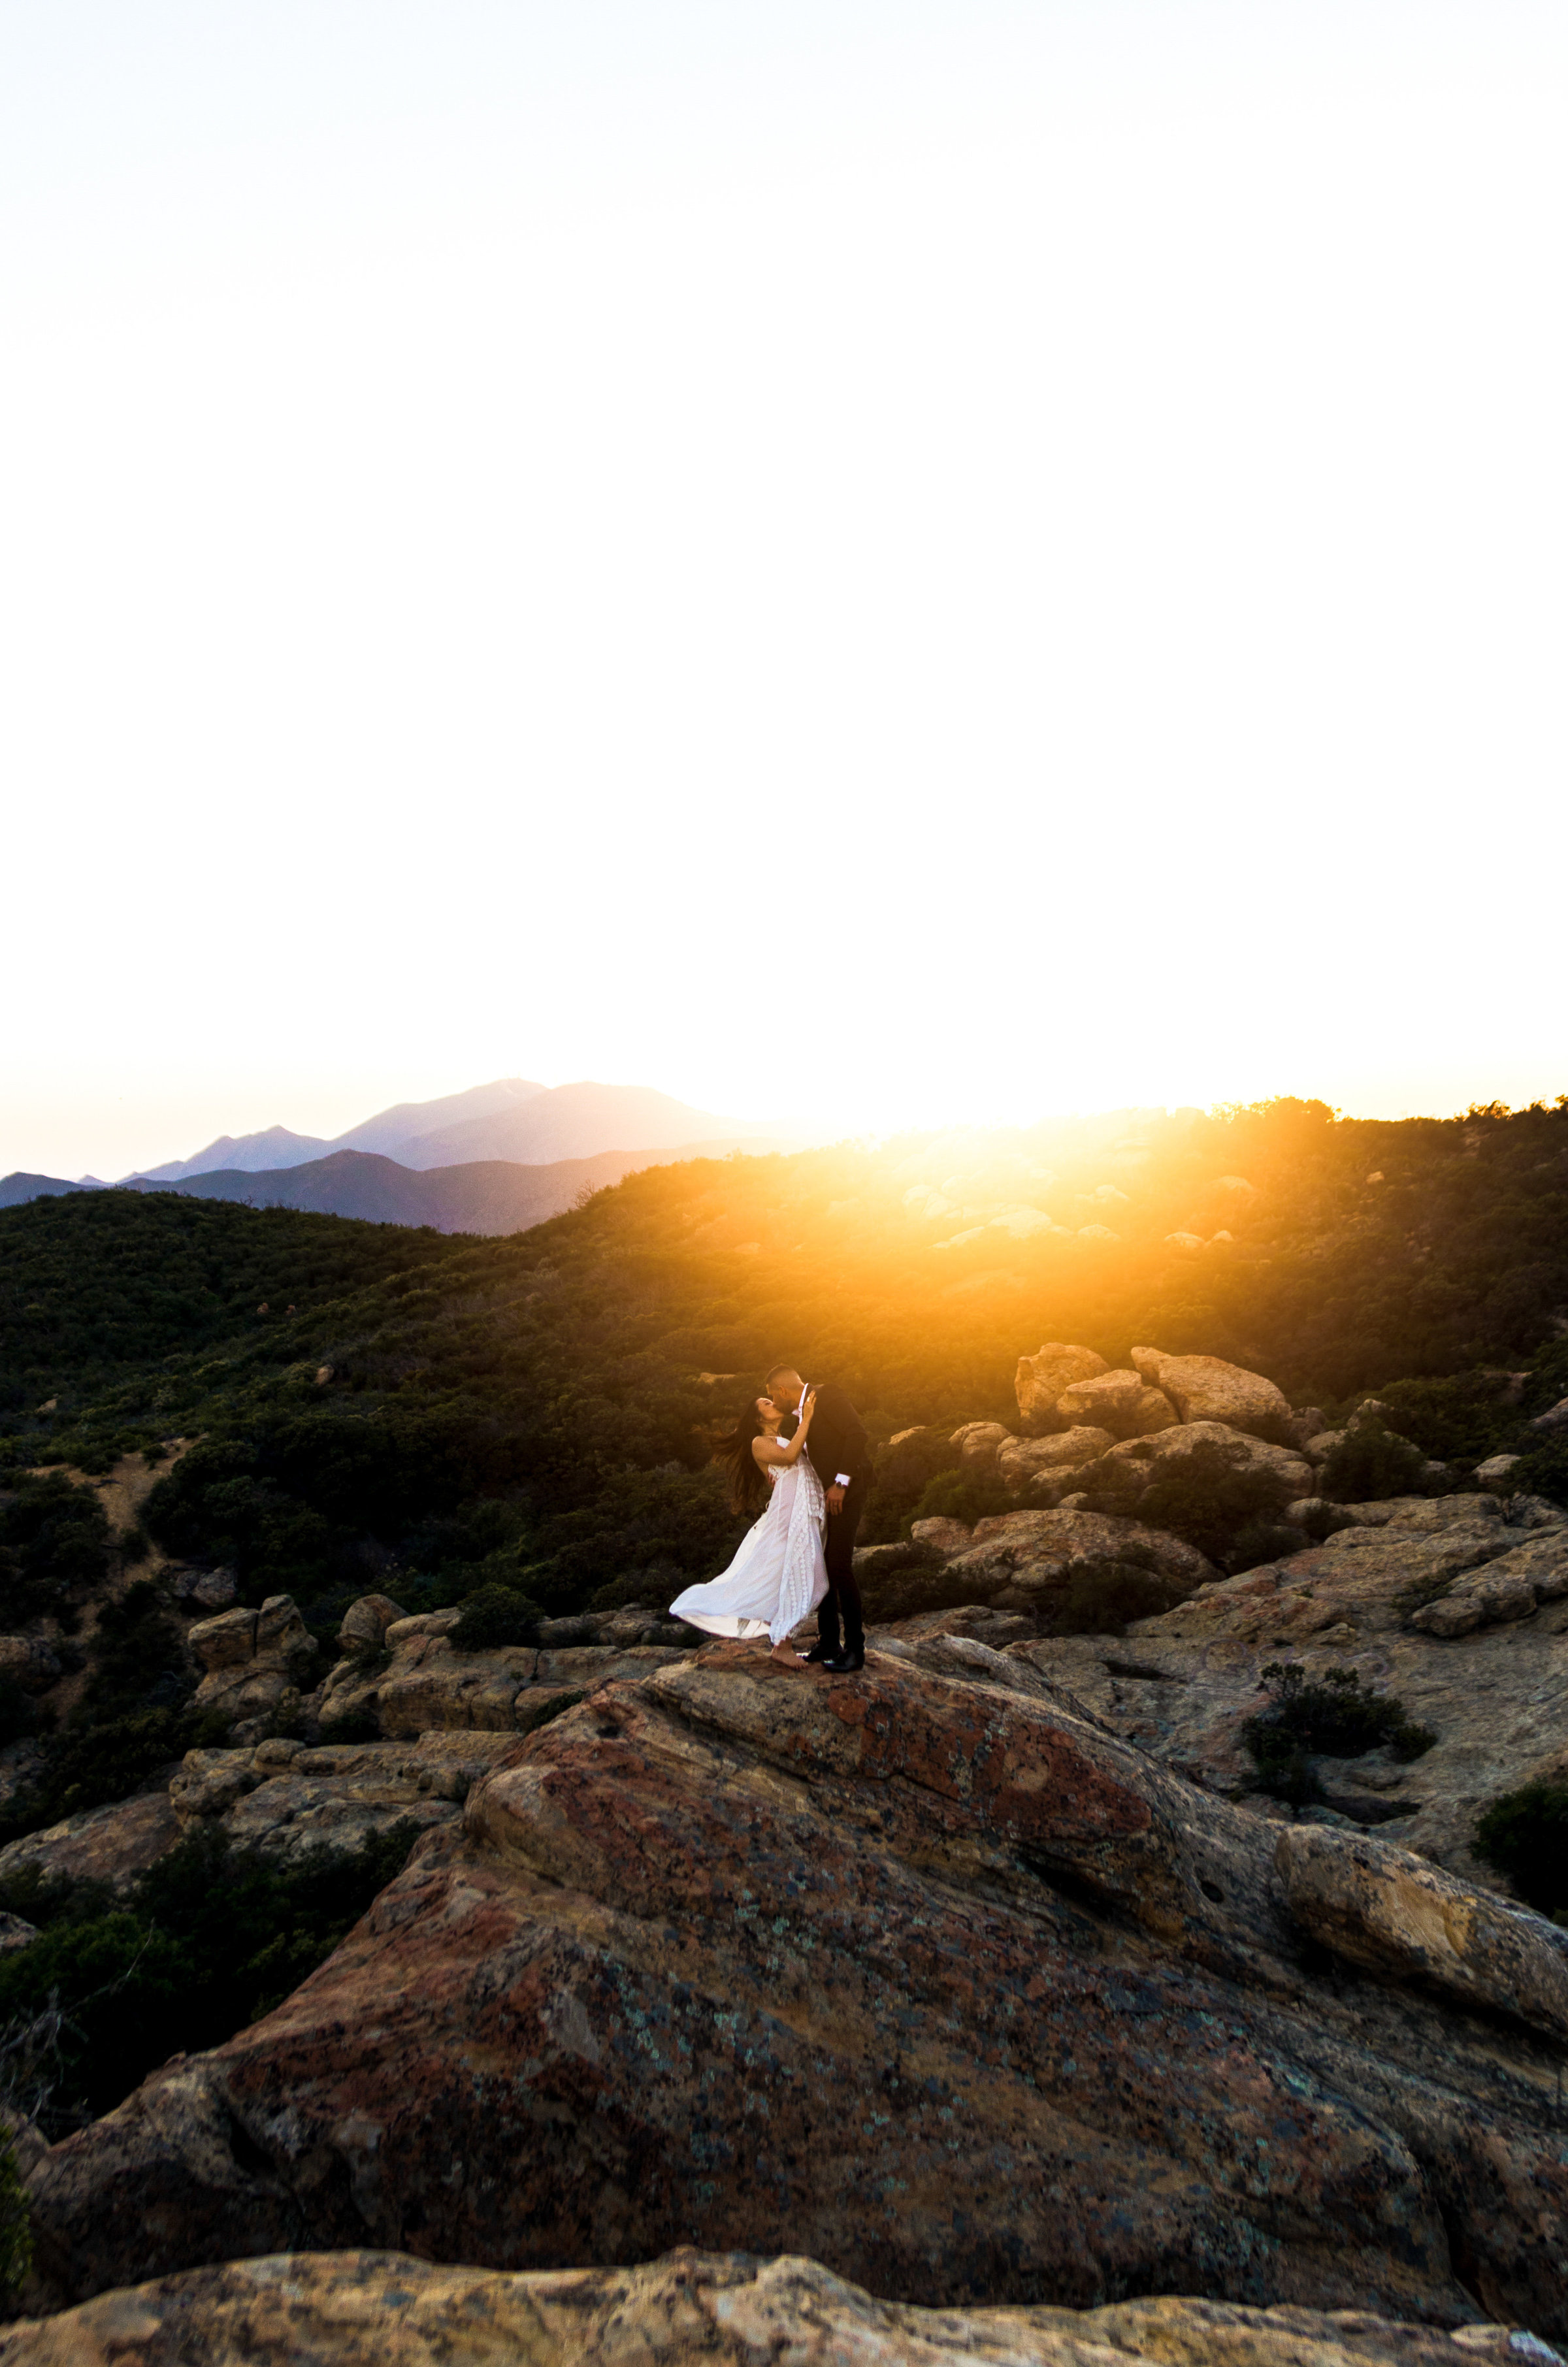 Couple in wedding attire kissing at sunset on a rock